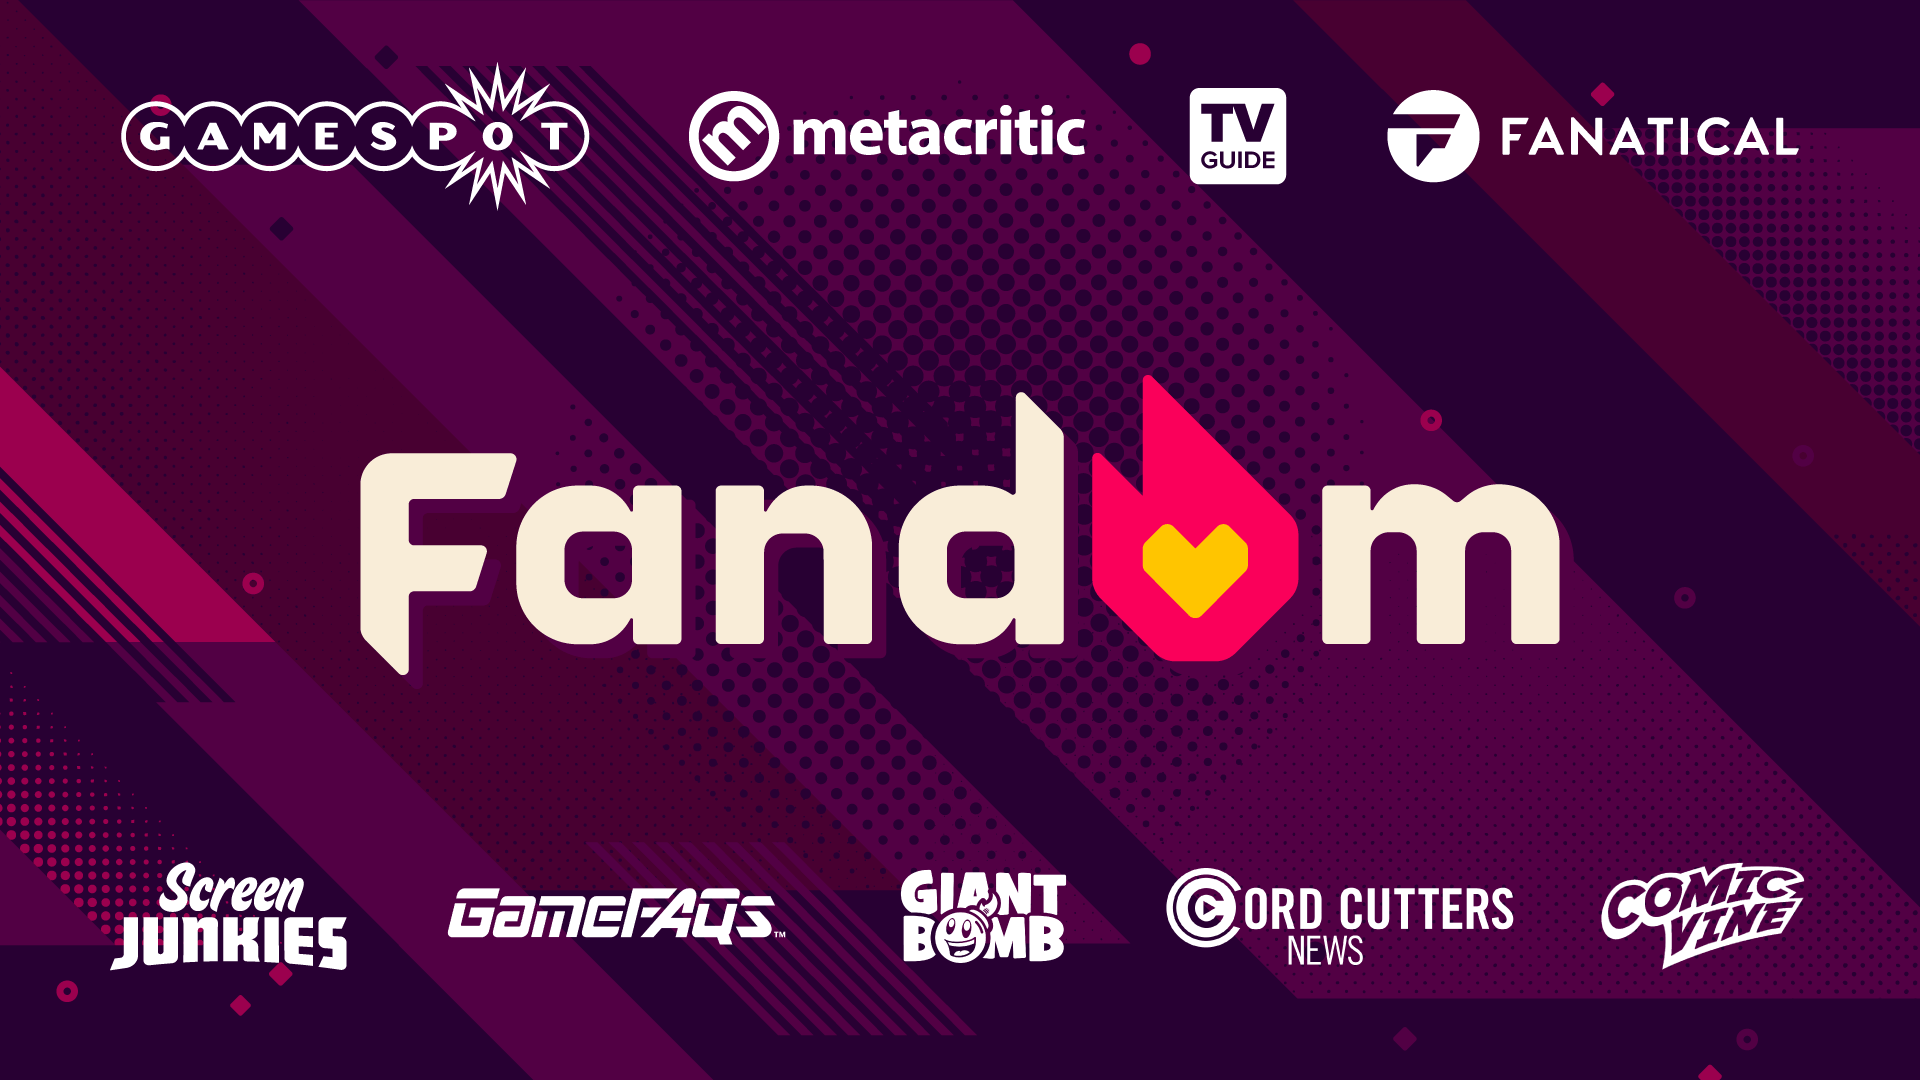 Fandom acquires GameSpot, Metacritic and Giant Bomb, other sites